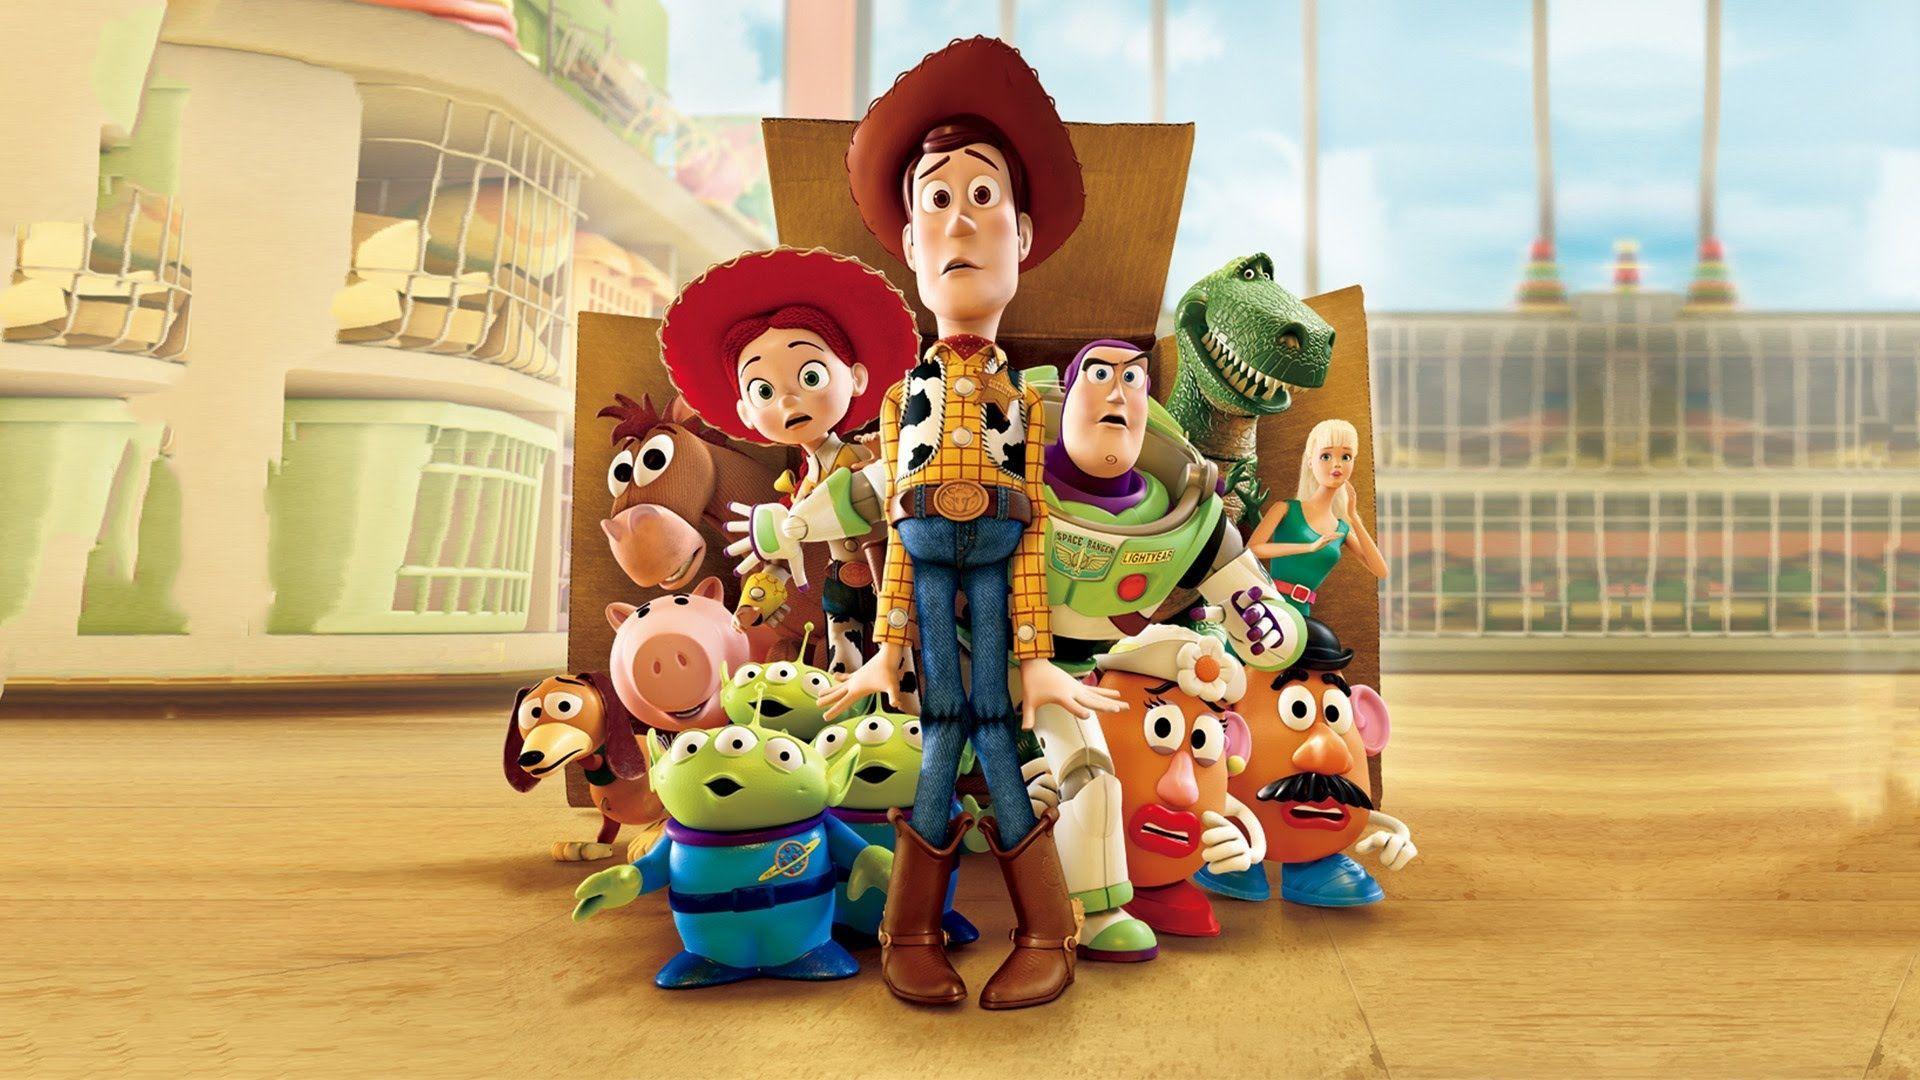 Toy Story Full HD Wallpaper 1920x 1366x768 and other